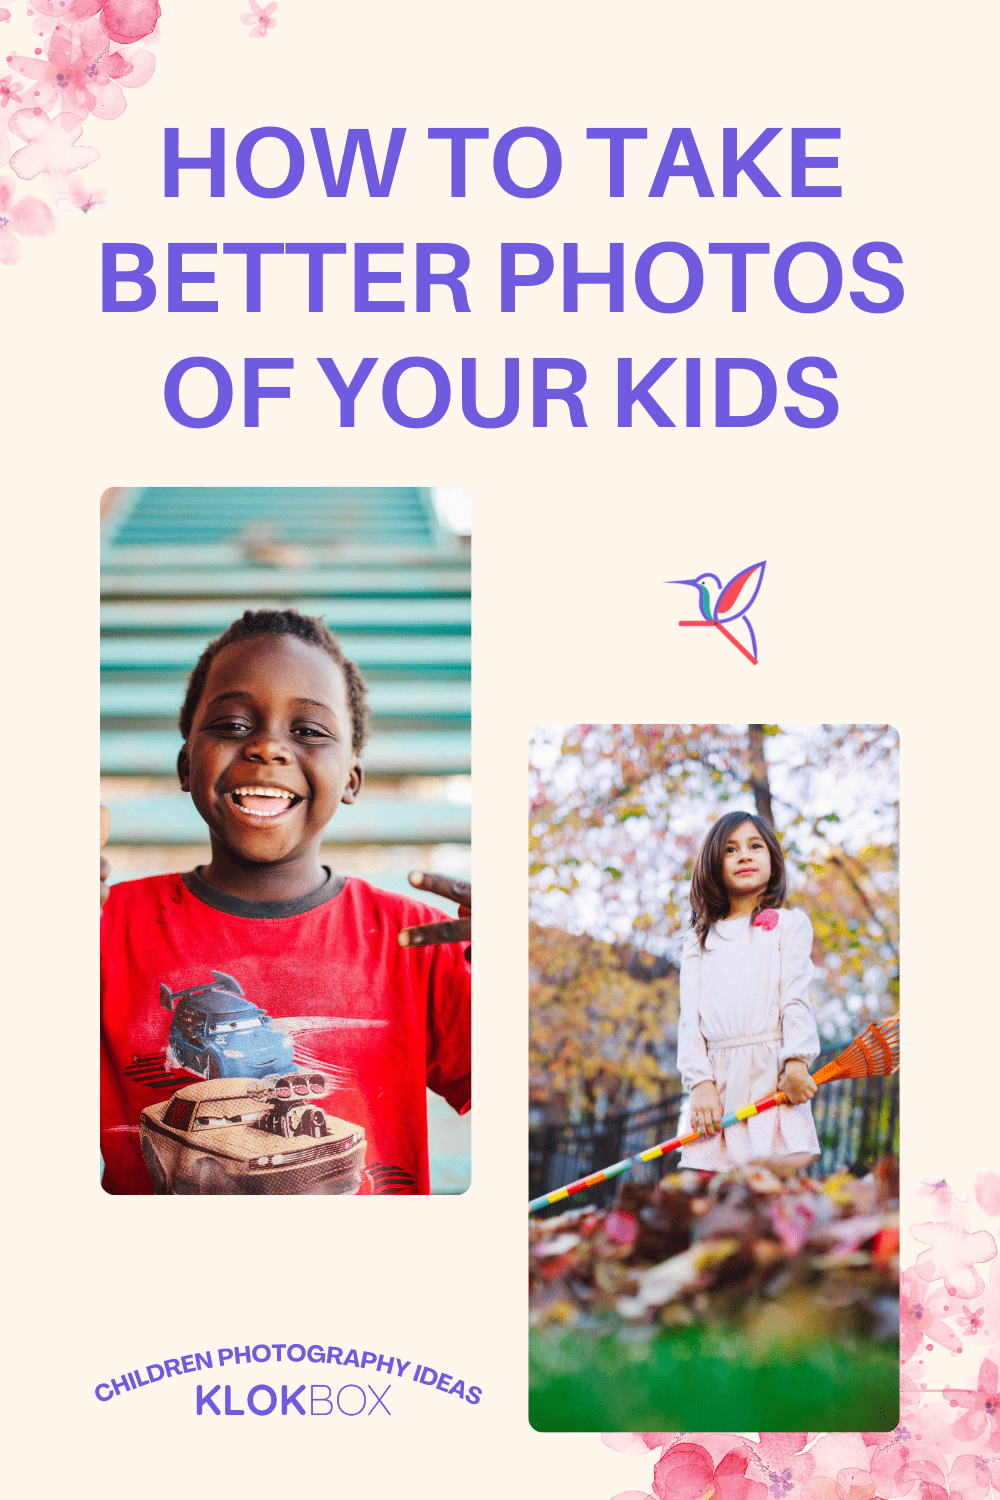 How To Take Better Photos of Your Kids. Children Photography Ideas